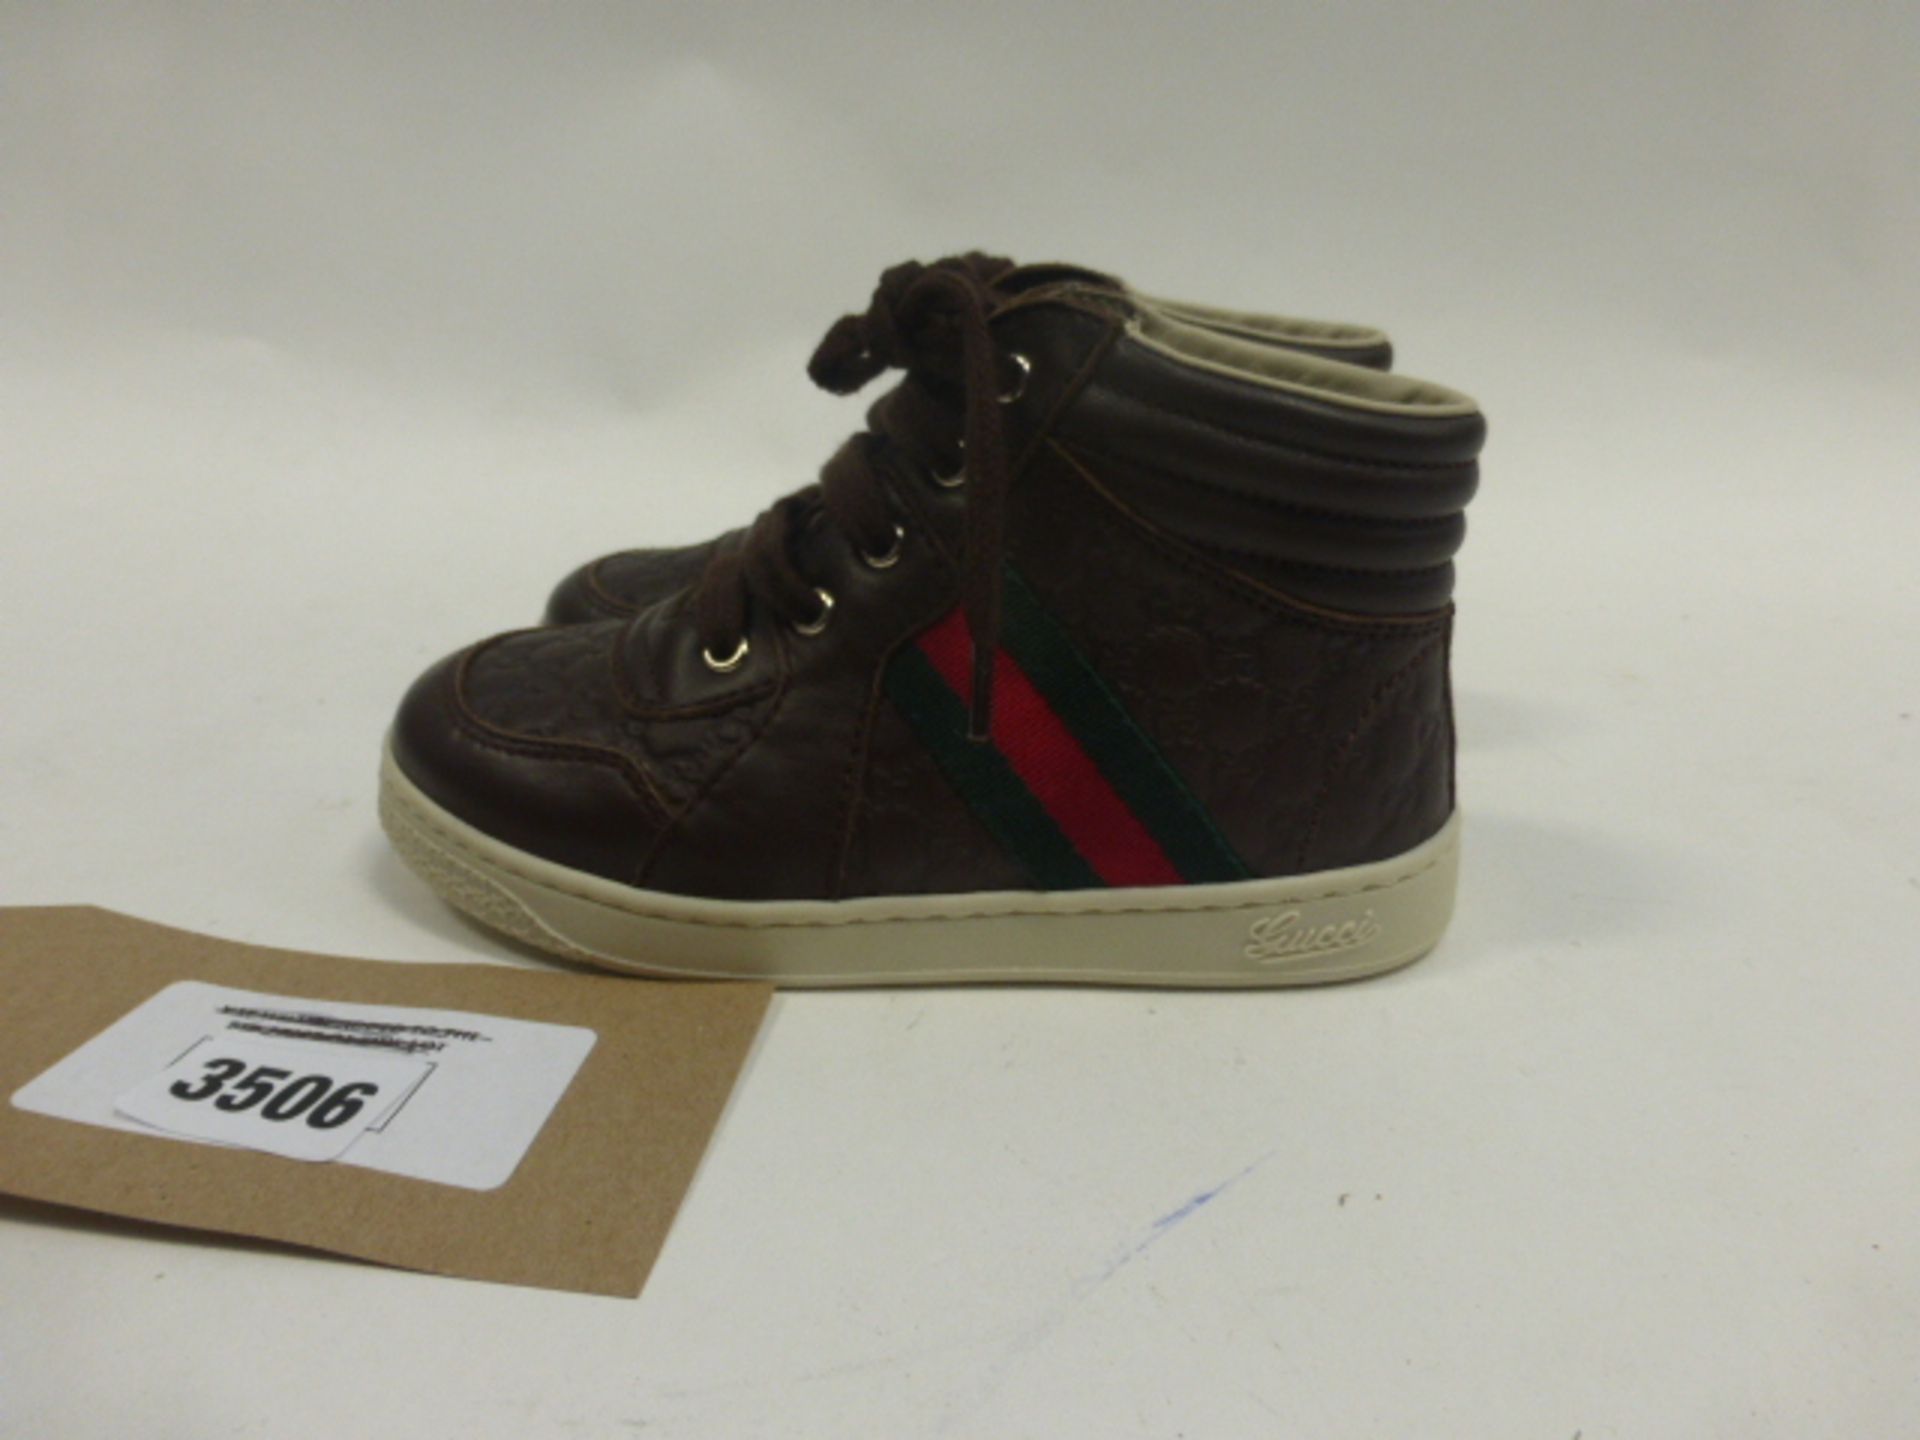 Childrens Gucci brown leather monogram trainers size EU 25 (used)